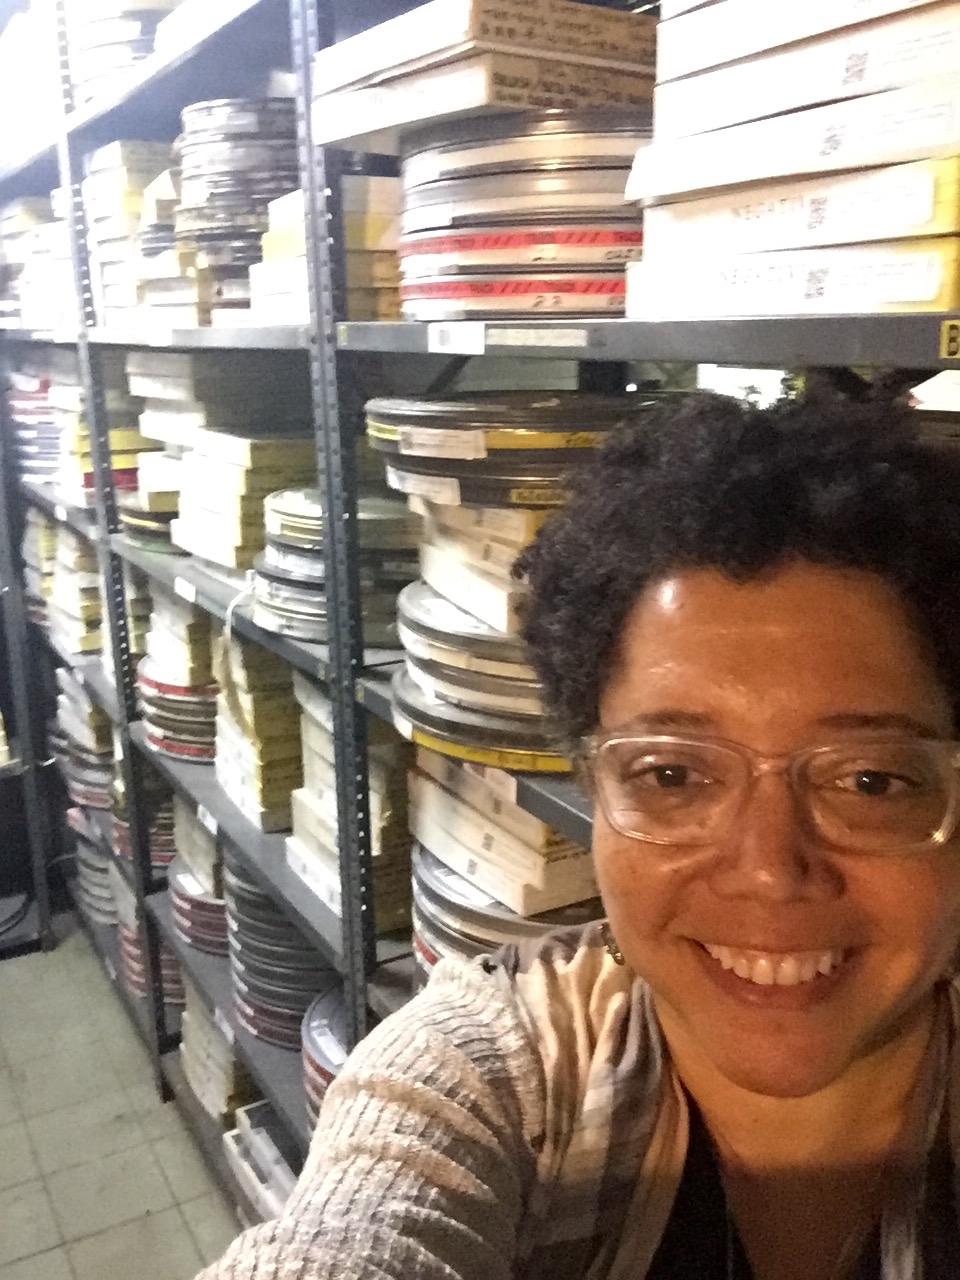 HFPA-funded intern Ina Archer at IndieCollect in Spring 2016